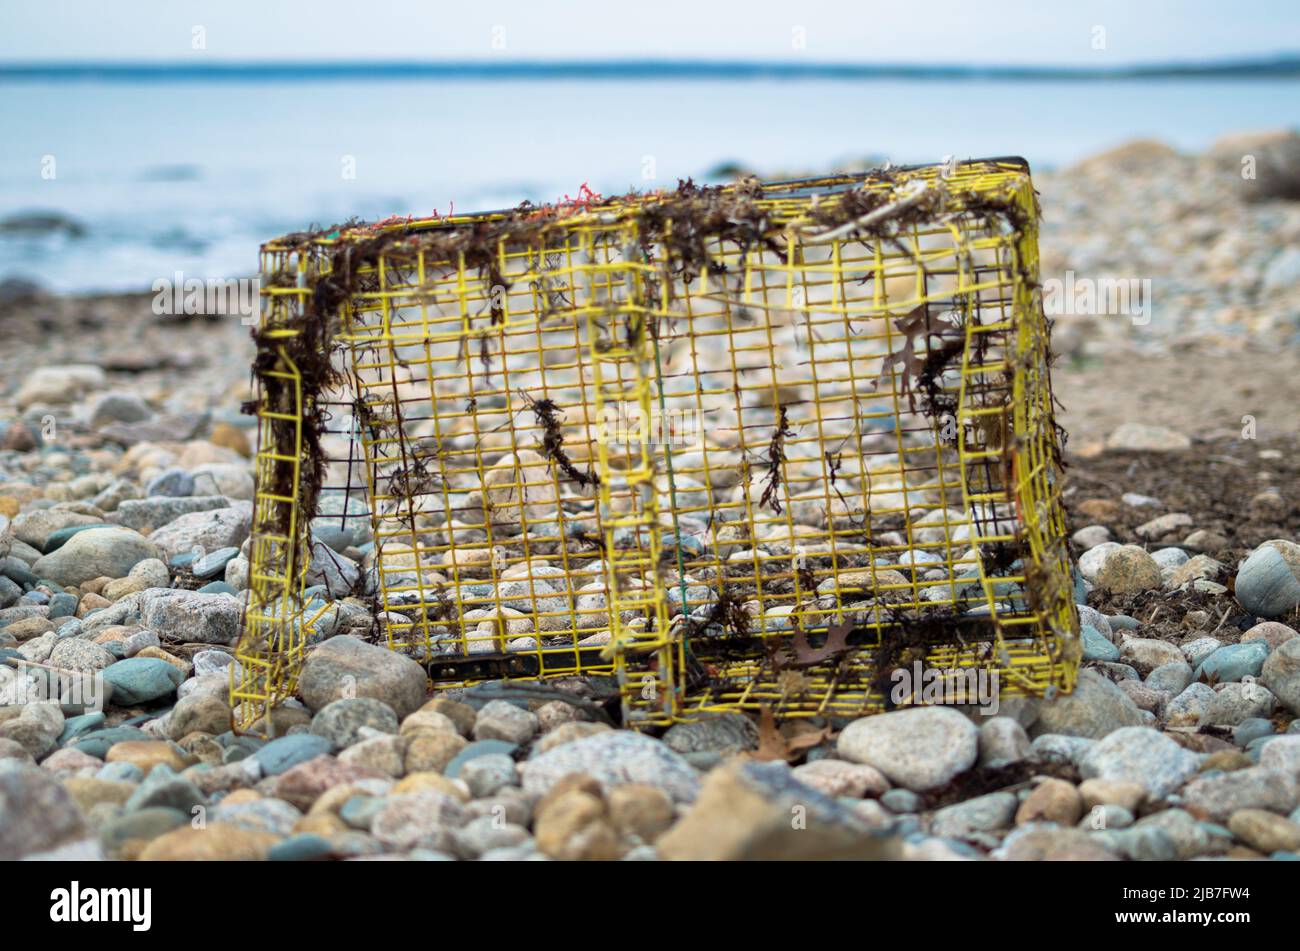 A perspective view of a washed up Lobster Cage on Beach at Gooseberry Island, Westport, MA, USA Stock Photo